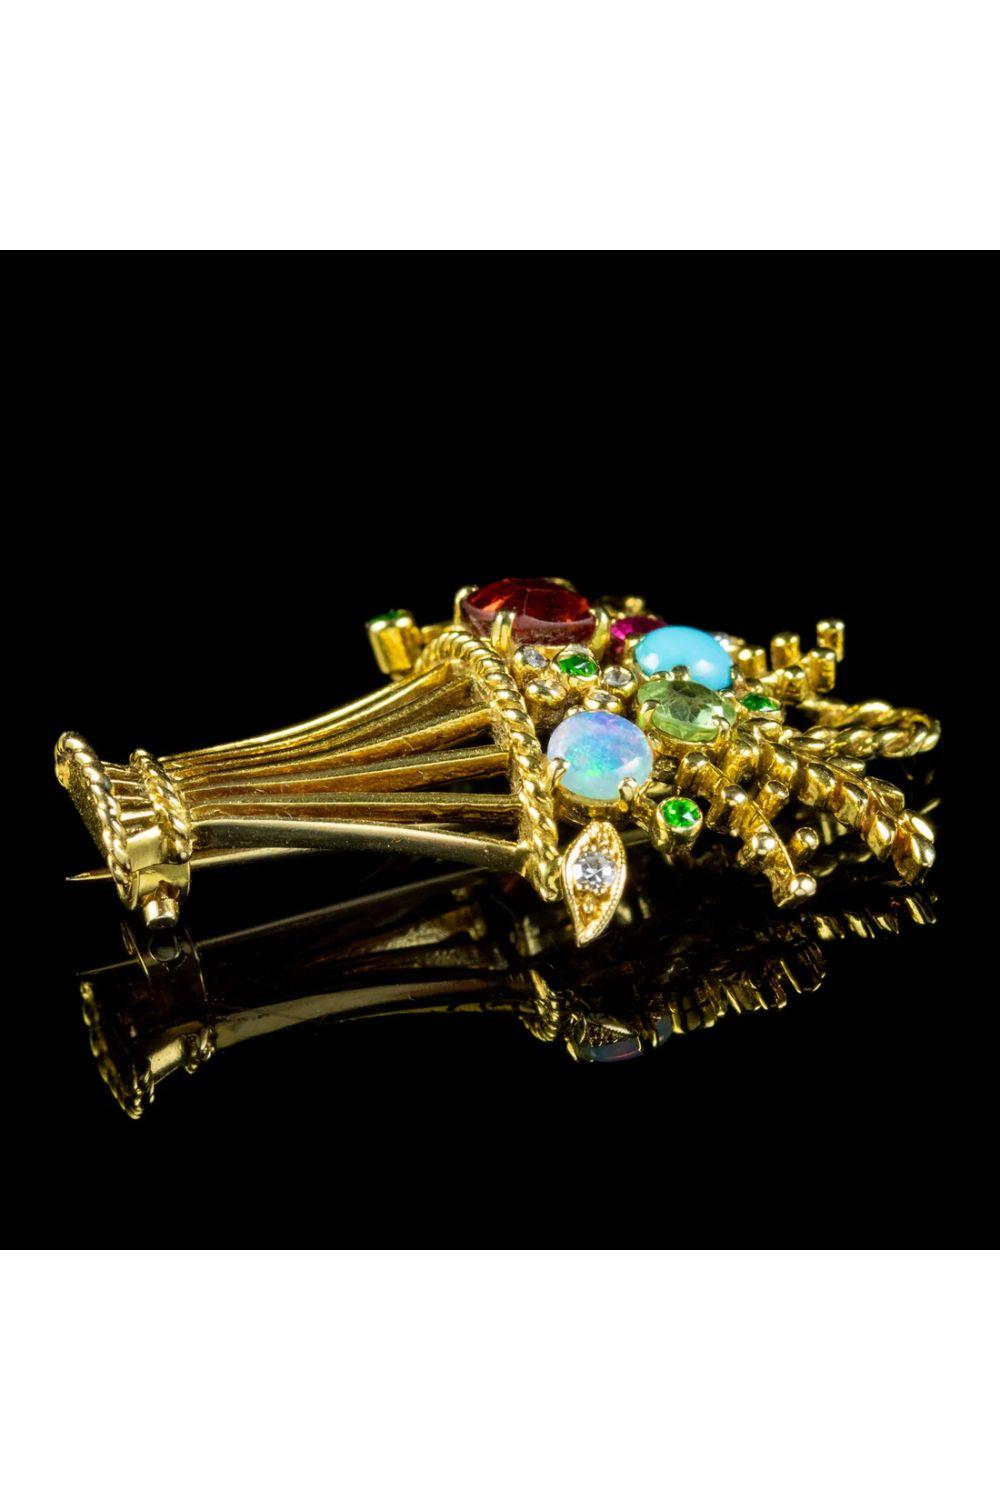 Vintage Giardinetti Gemstone Flower Vase Brooch in 18ct Gold, circa 1930 -1950 In Good Condition For Sale In Kendal, GB